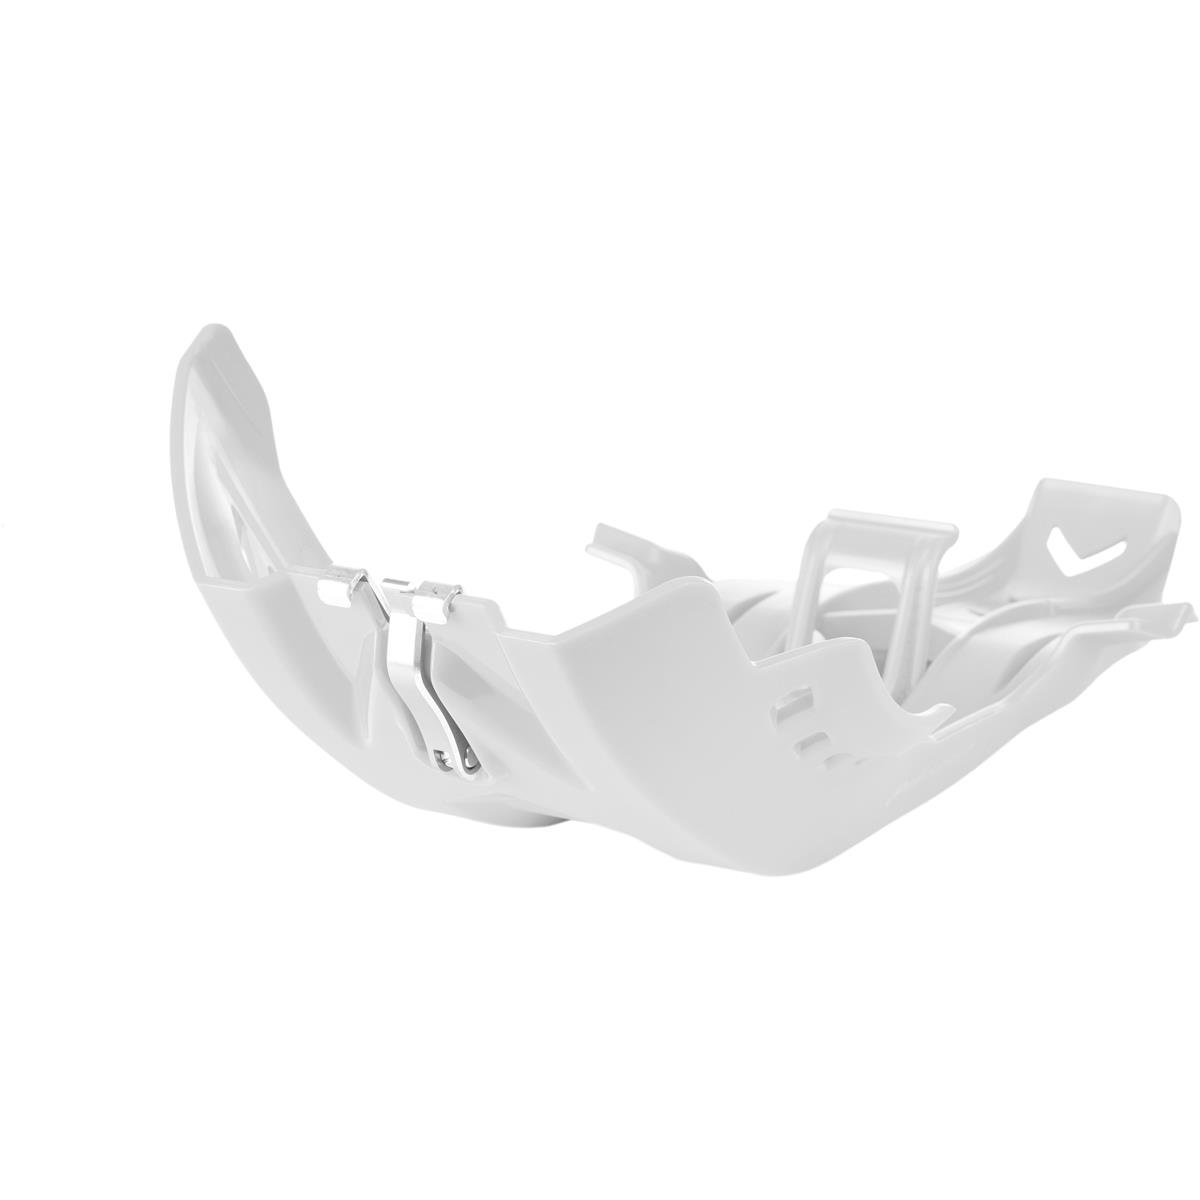 Polisport Skid plate with deflection protection Fortress KTM SX-F 16-20, EXC-F 17-20, Husqvarna FC 16-20, FE 17-20, White